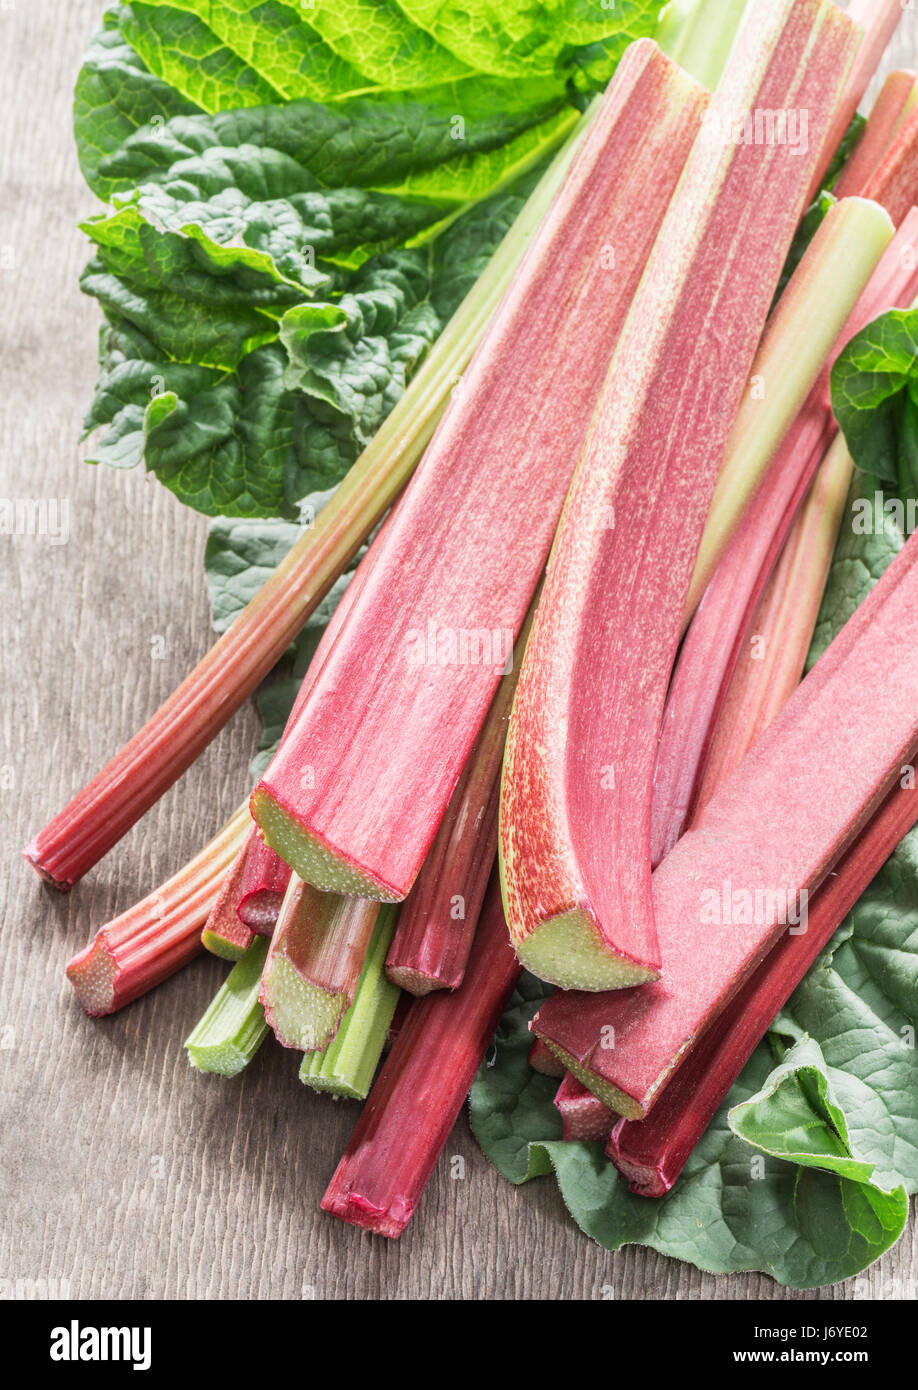 Edible rhubarb stalks on the wooden table. Stock Photo